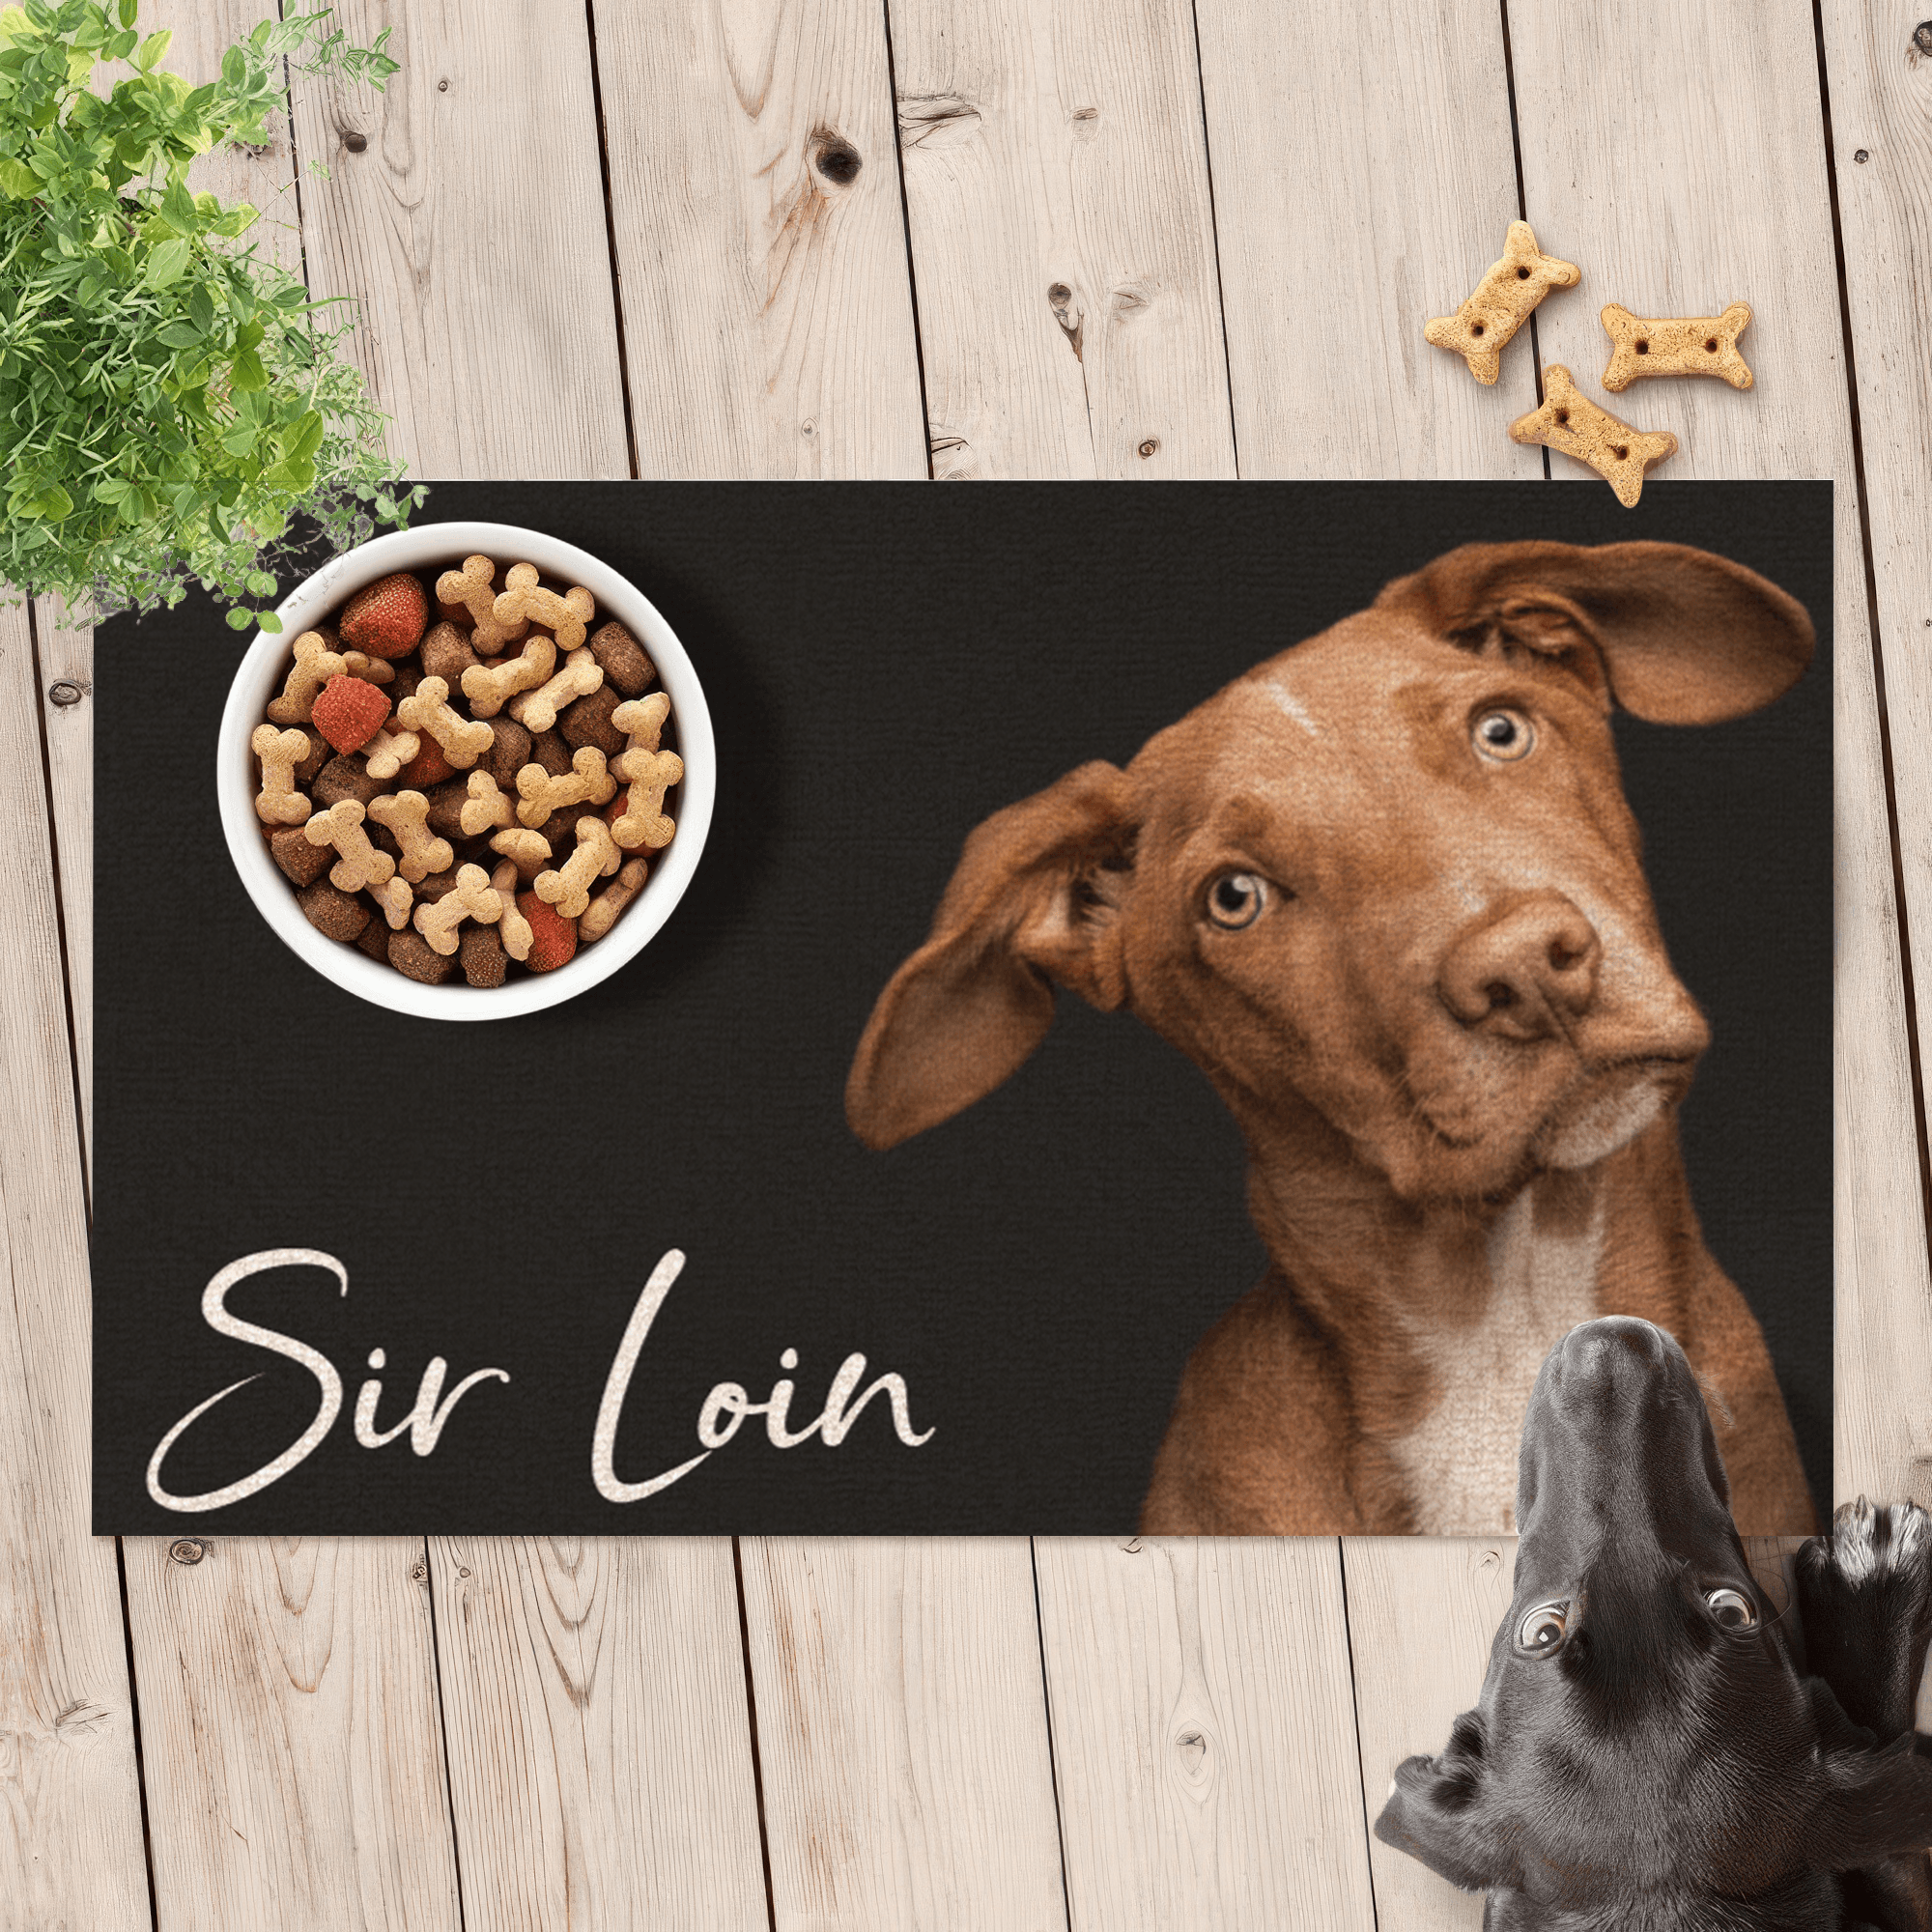 [Photo Inserted] Personalized Pet Food Mat With Photo - Personalized Doormat - Birthday, Housewarming, Funny Gift for Homeowners, Friends, Dog Mom, Dog Dad, Dog Lovers, Pet Gifts for Him, Her - Suzitee Store